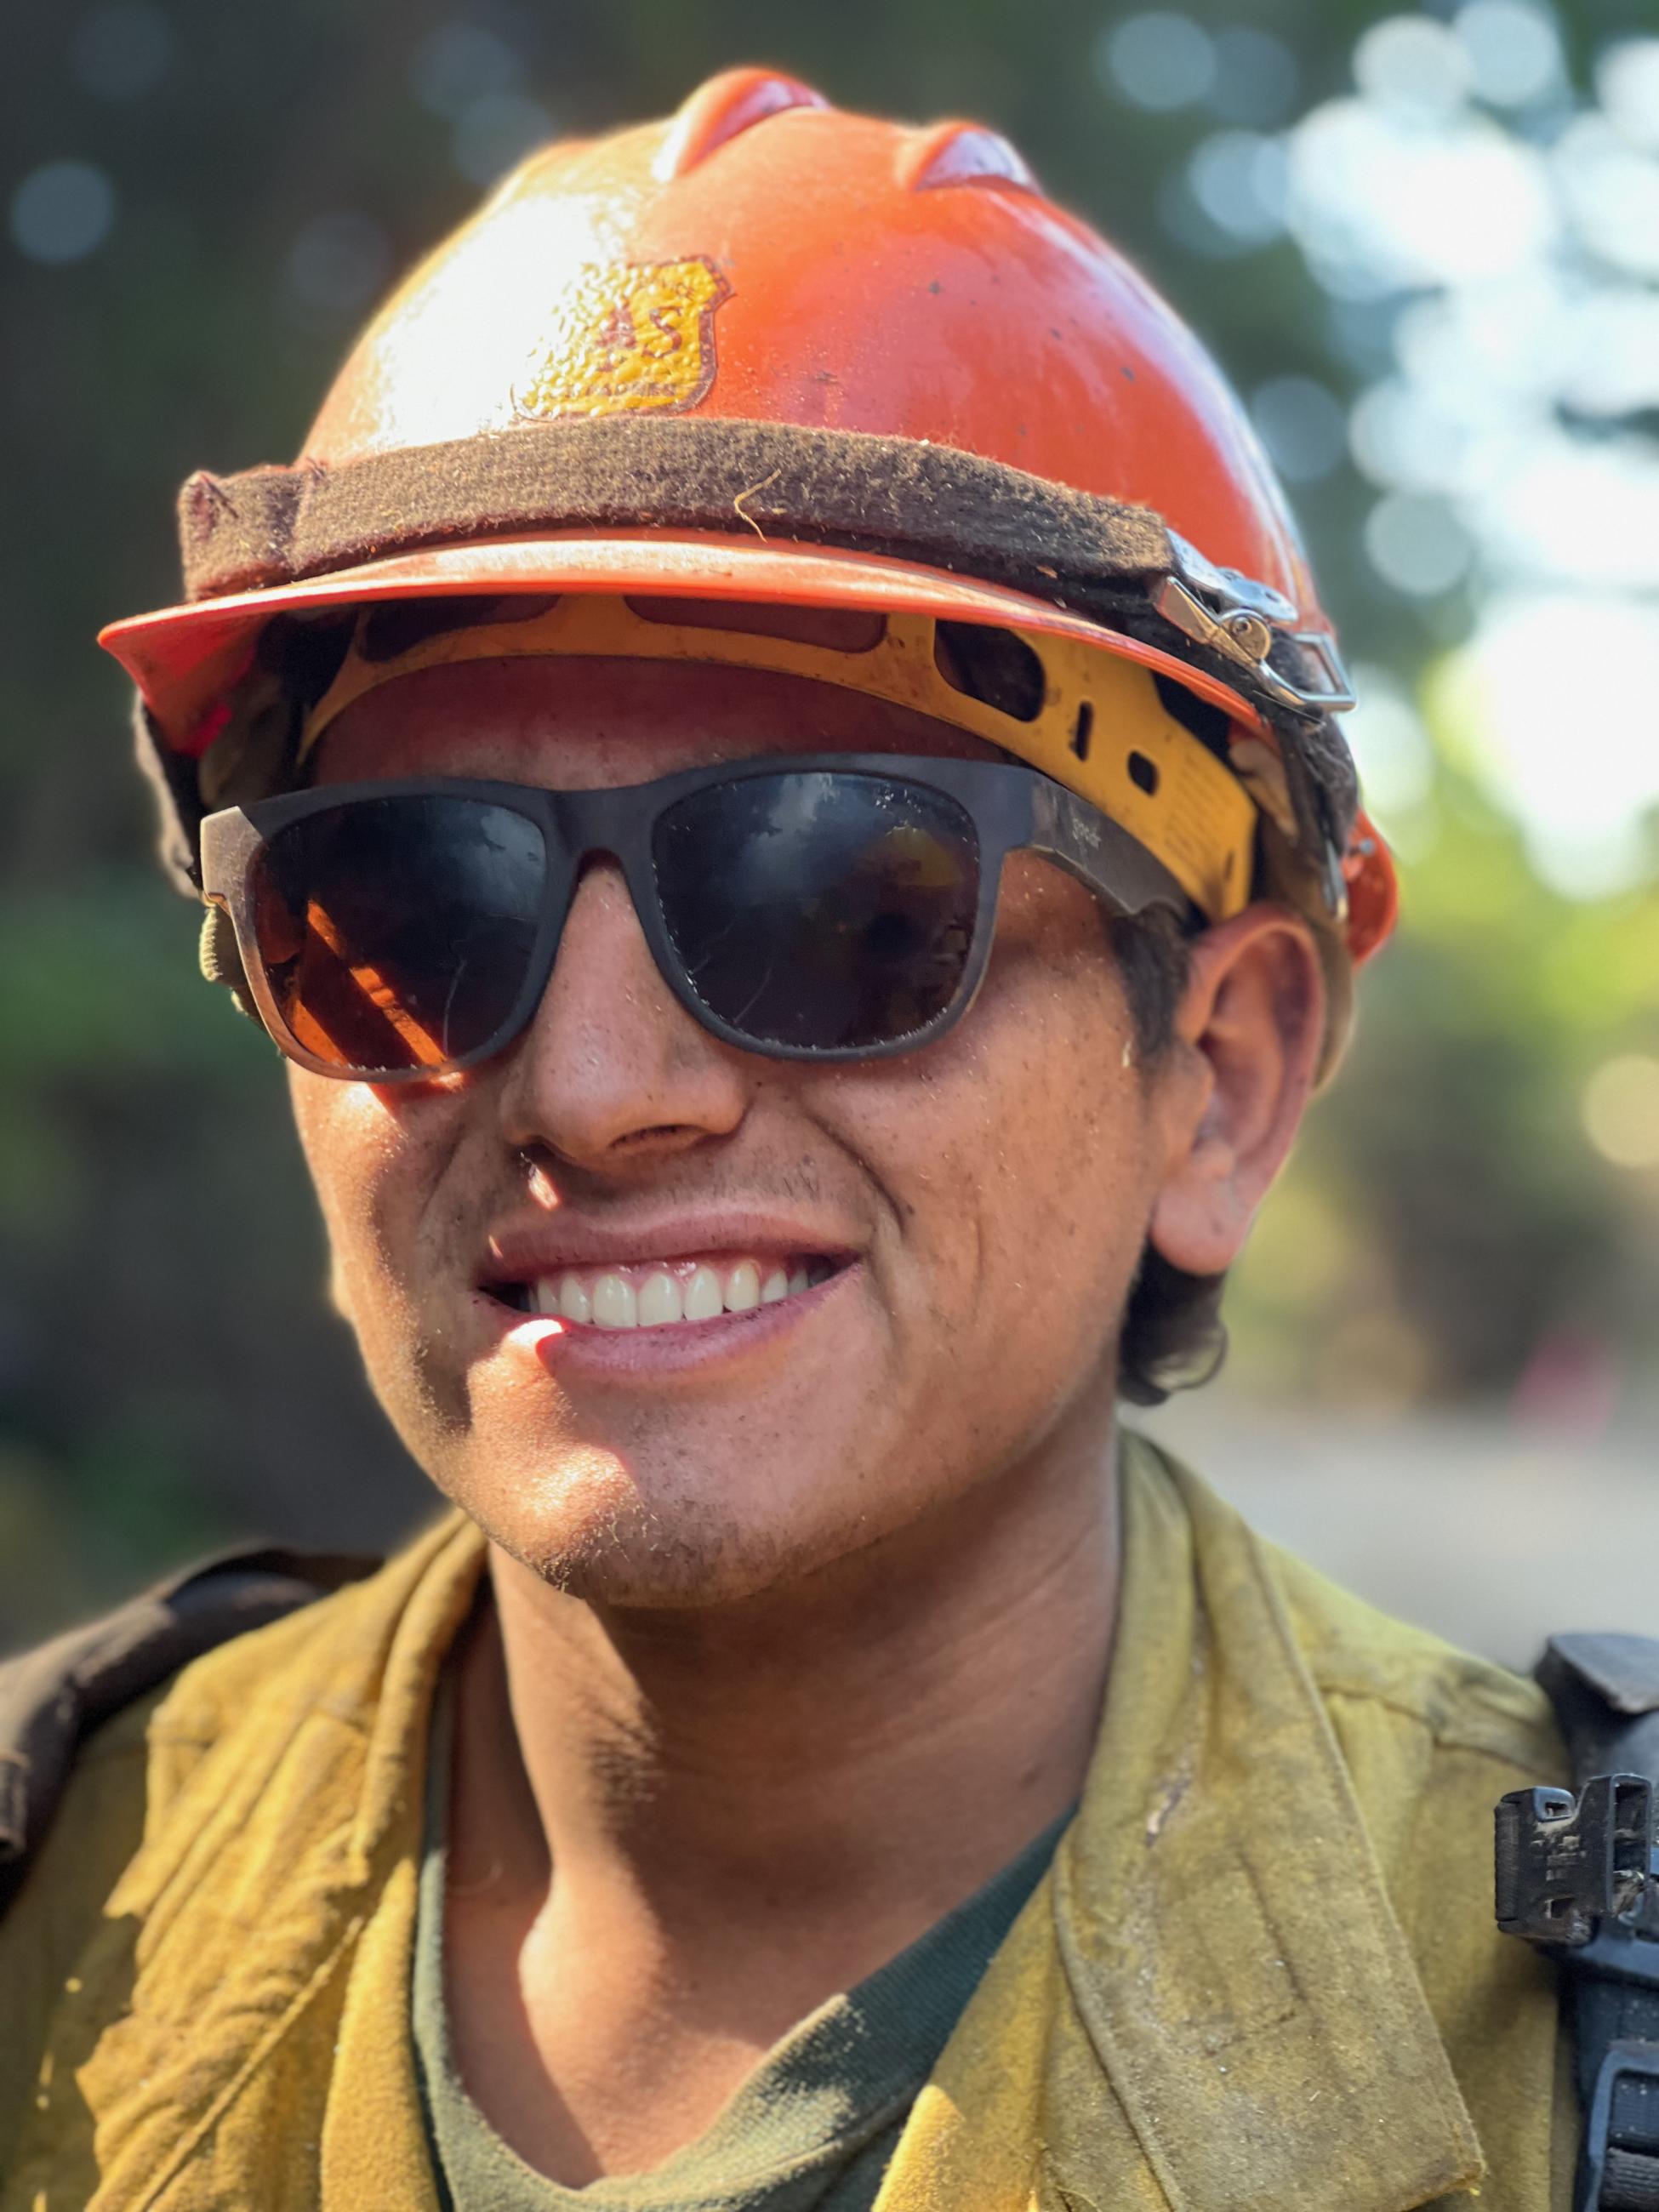 A portrait of a firefighter in a yellow shirt, orange helmet and wearing sunglasses.